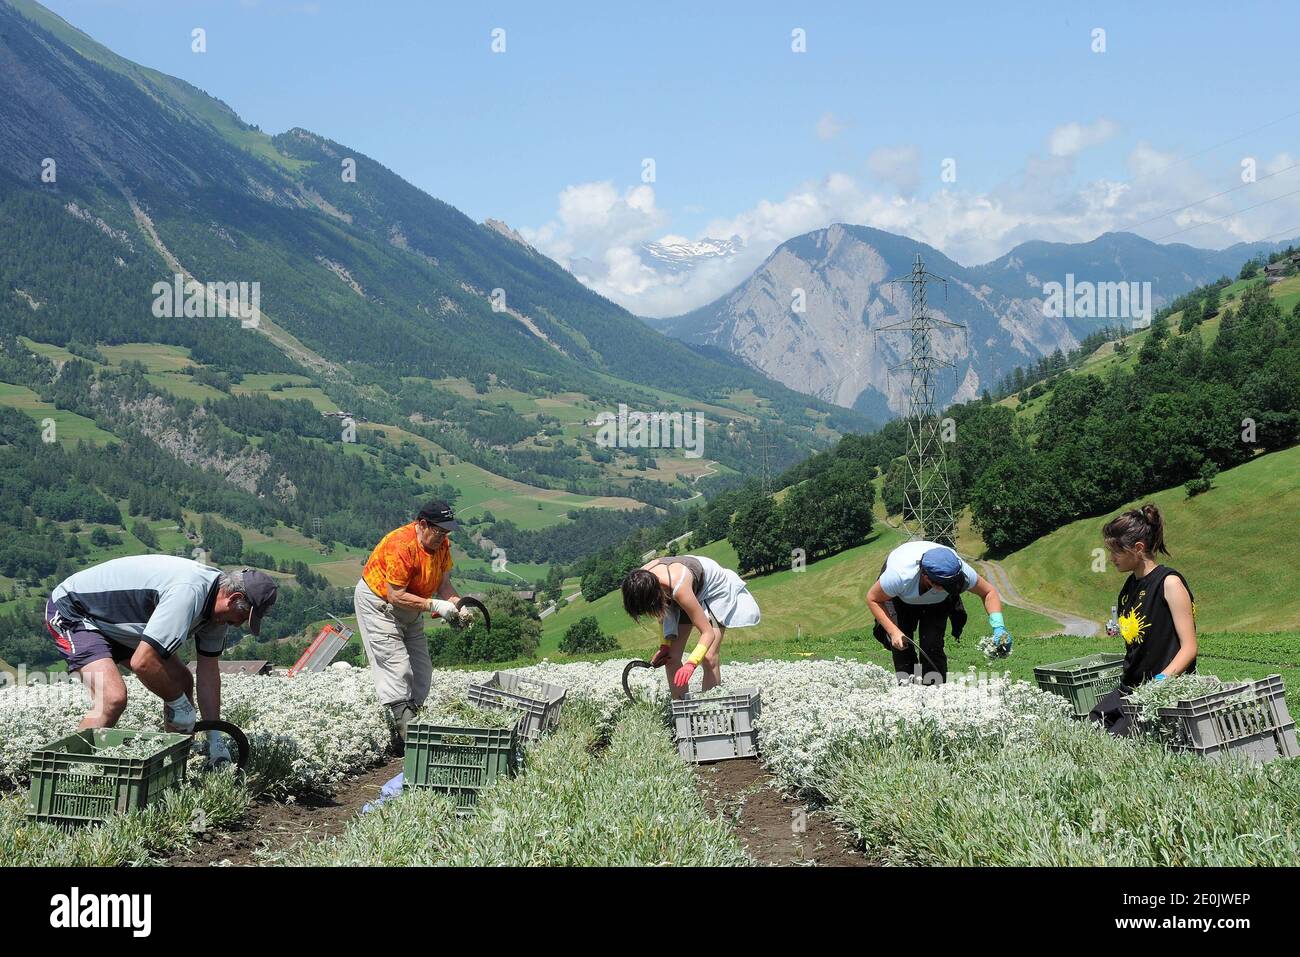 EXCLUSIVE. The Tornay family during the Edelweiss harvest in their field, the only edelweiss field existing in the Valais region, in Orsieres, Switzerland on July 3, 2012. Photo by Jean-Guy Python/ABACAPRESS.COM Stock Photo